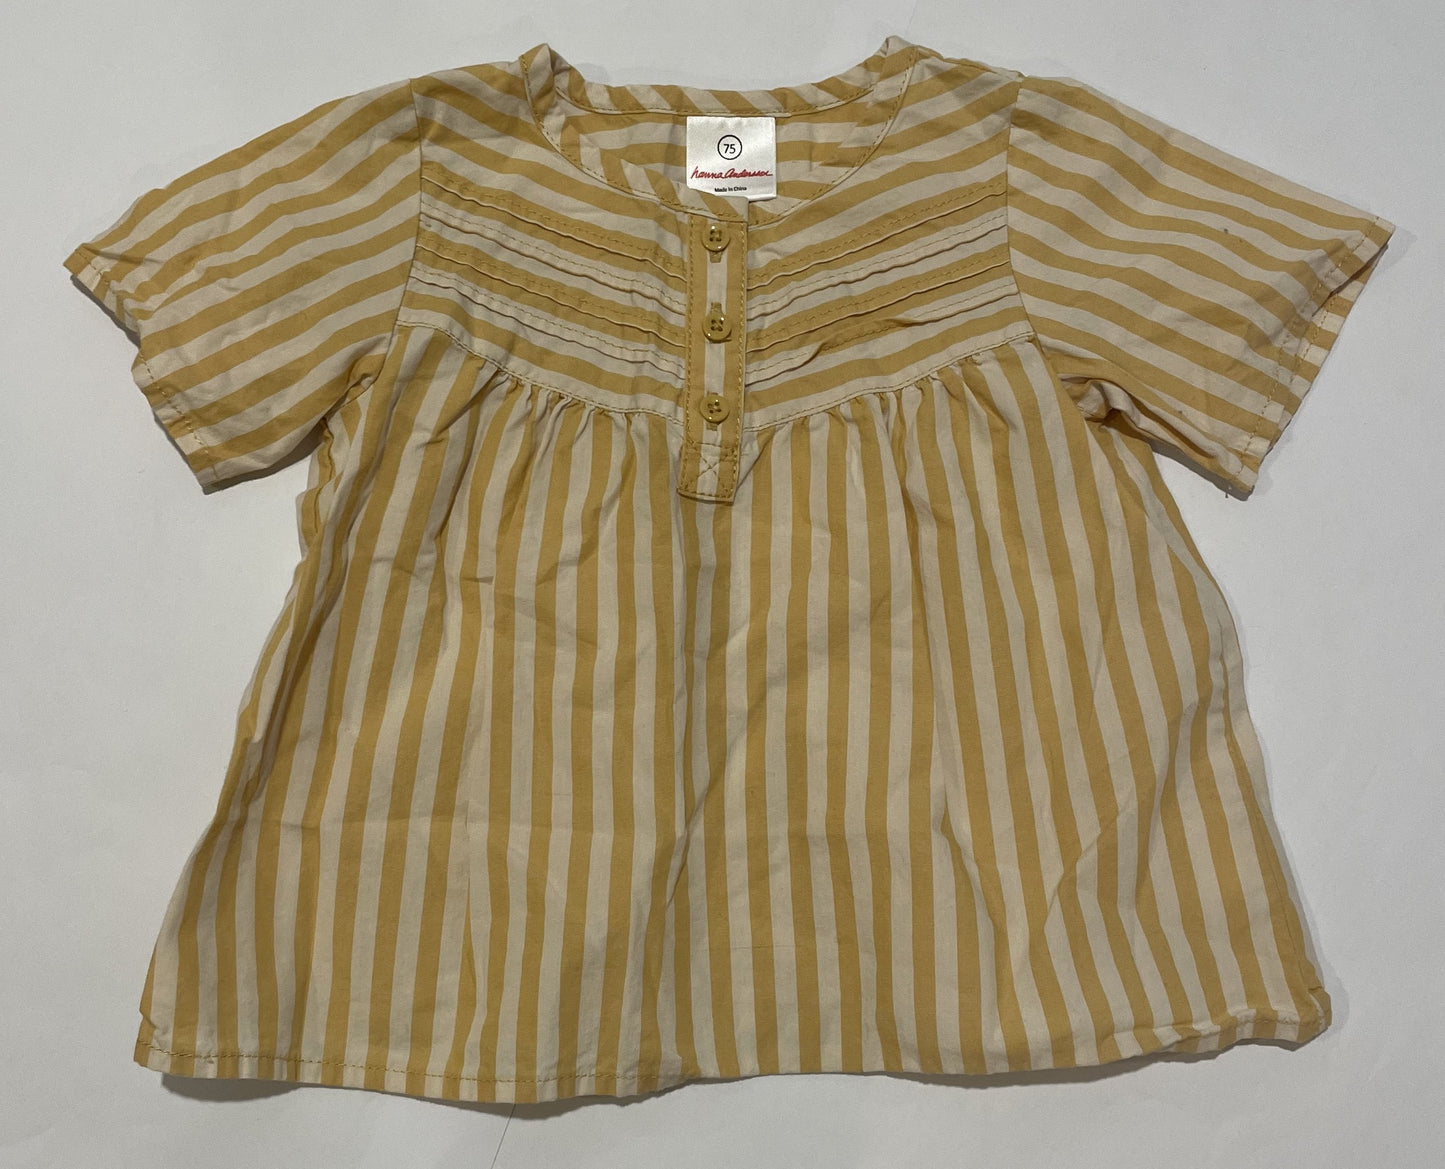 Hanna Andersson Size 75 (12-18 months) Yellow/White Shirt EUC